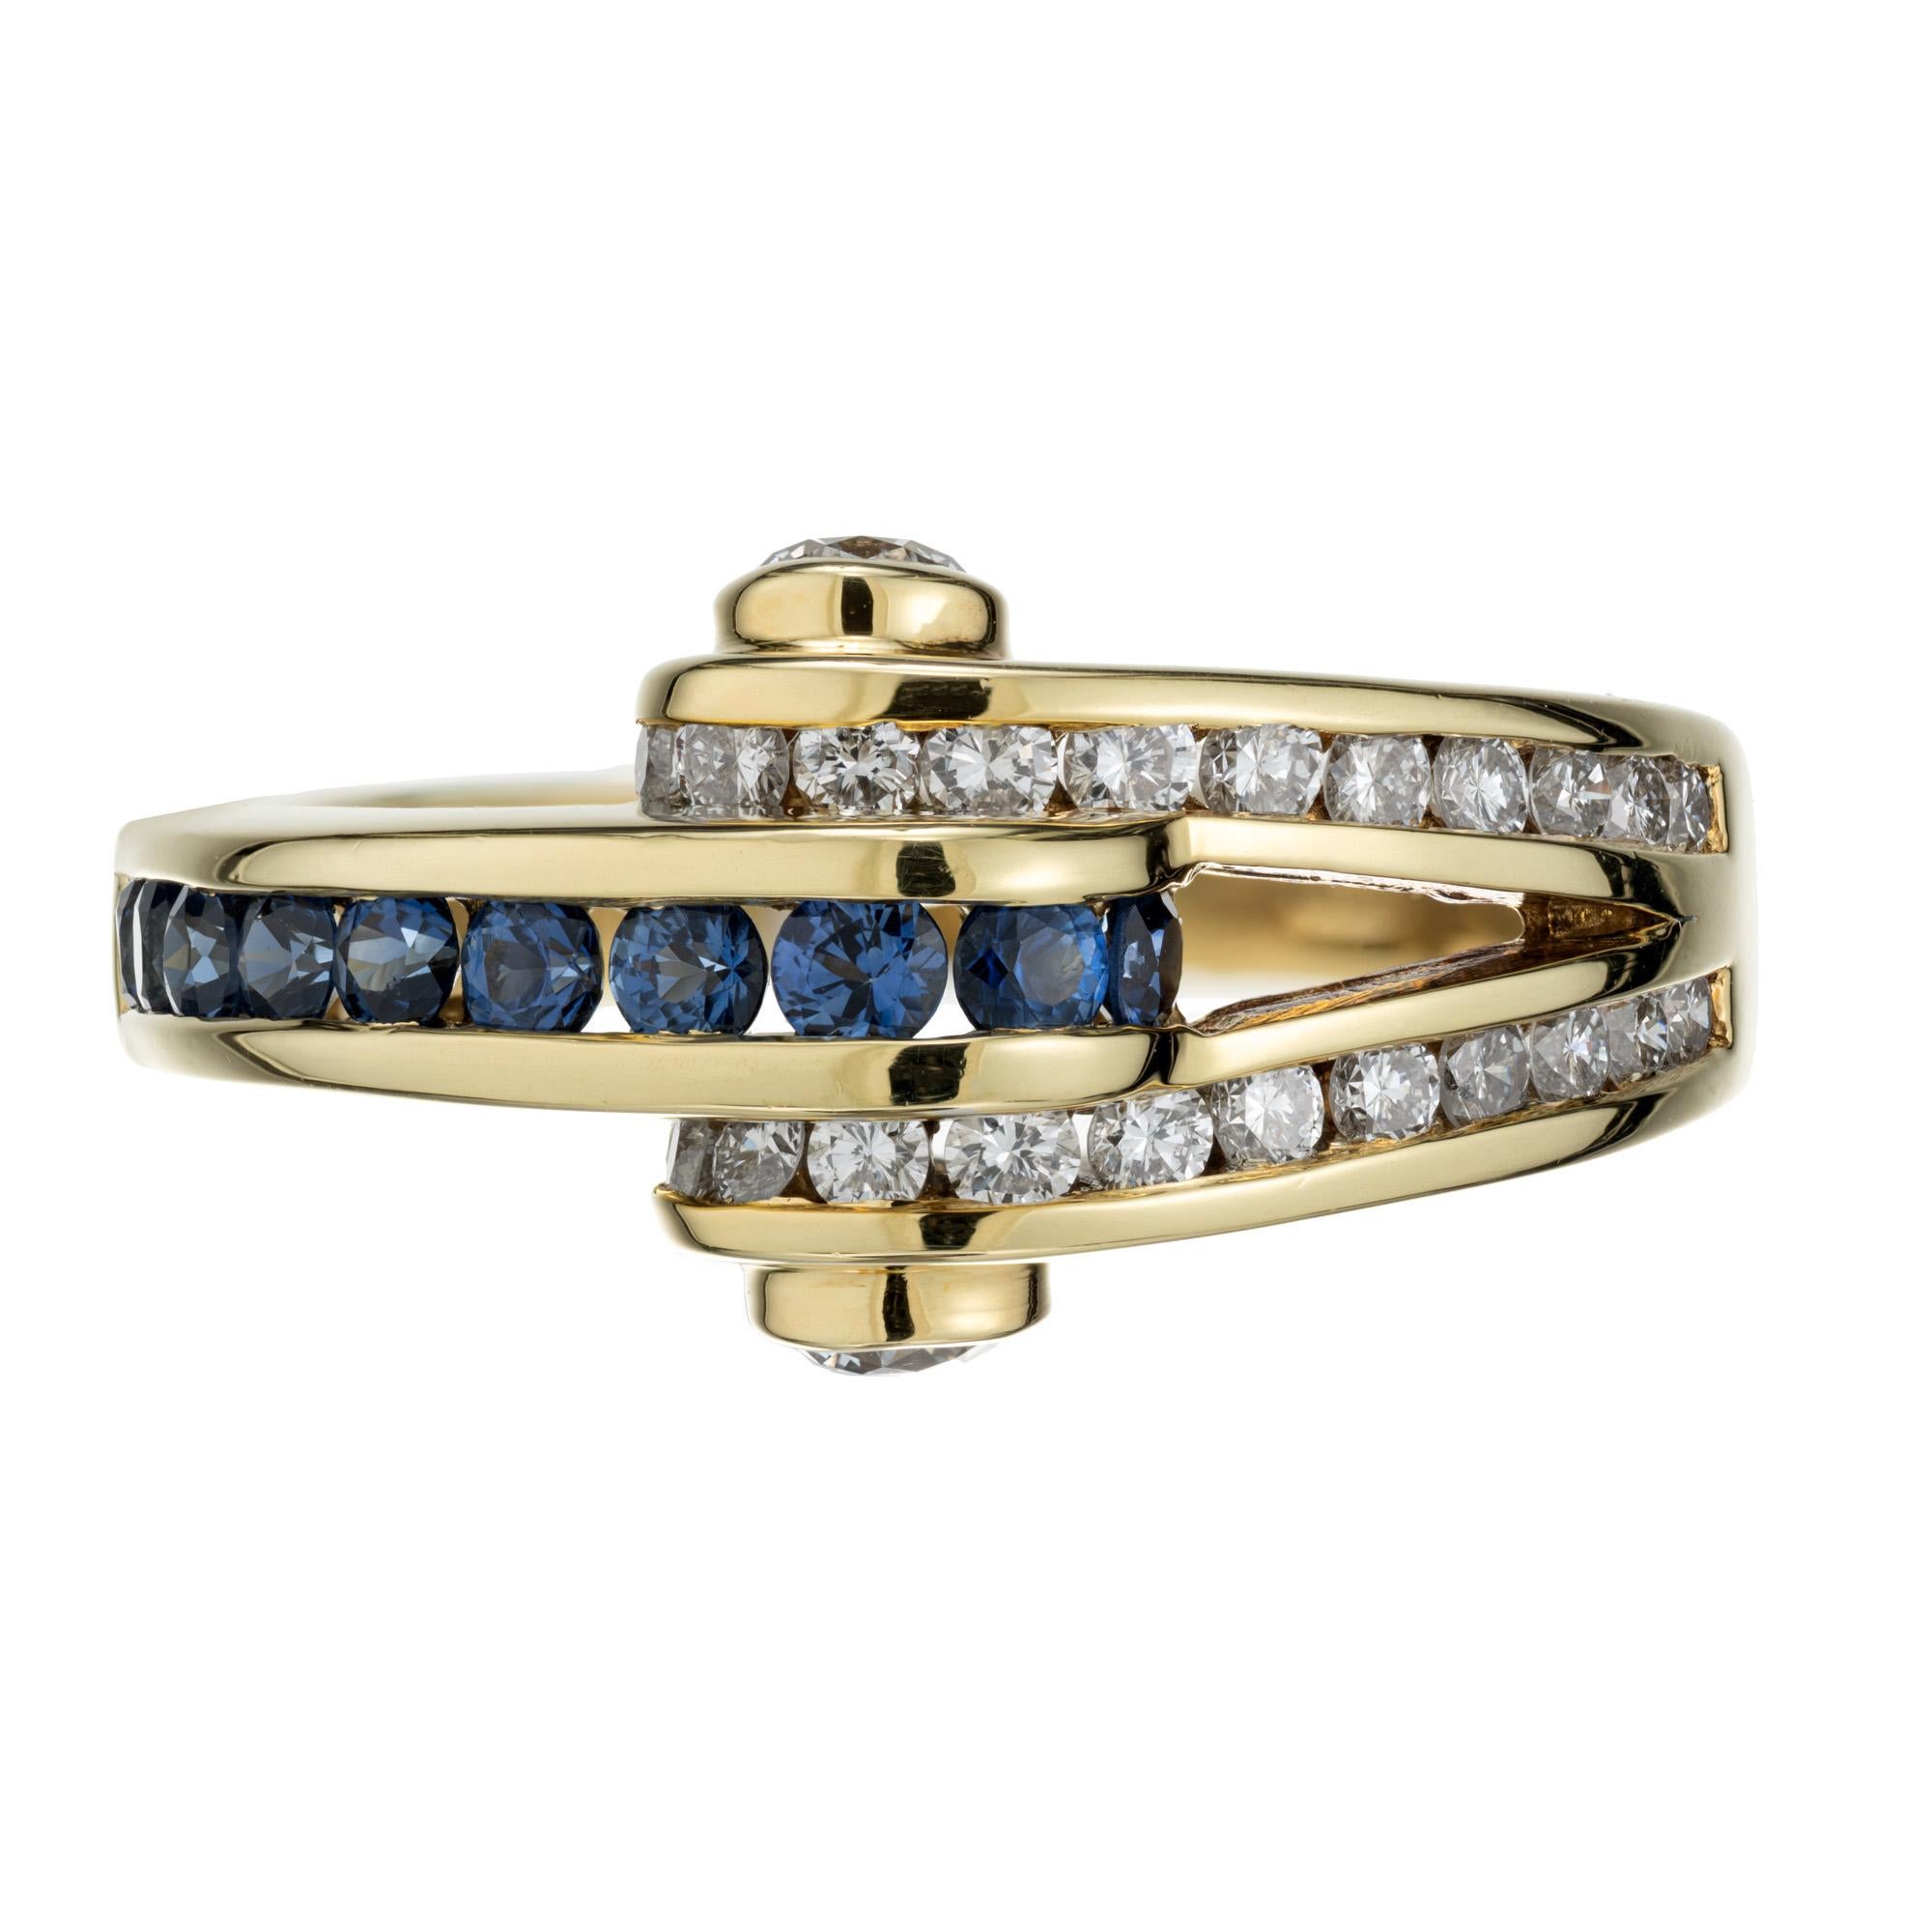 Authentic Charles Krypell sapphire and diamond ring. 10 round cut sapphires and 26 full cut diamonds set in 18k yellow gold split shank band ring. 

10 round fine blue Sapphires approx. total weight .30cts
26 full round cut diamonds approx. total